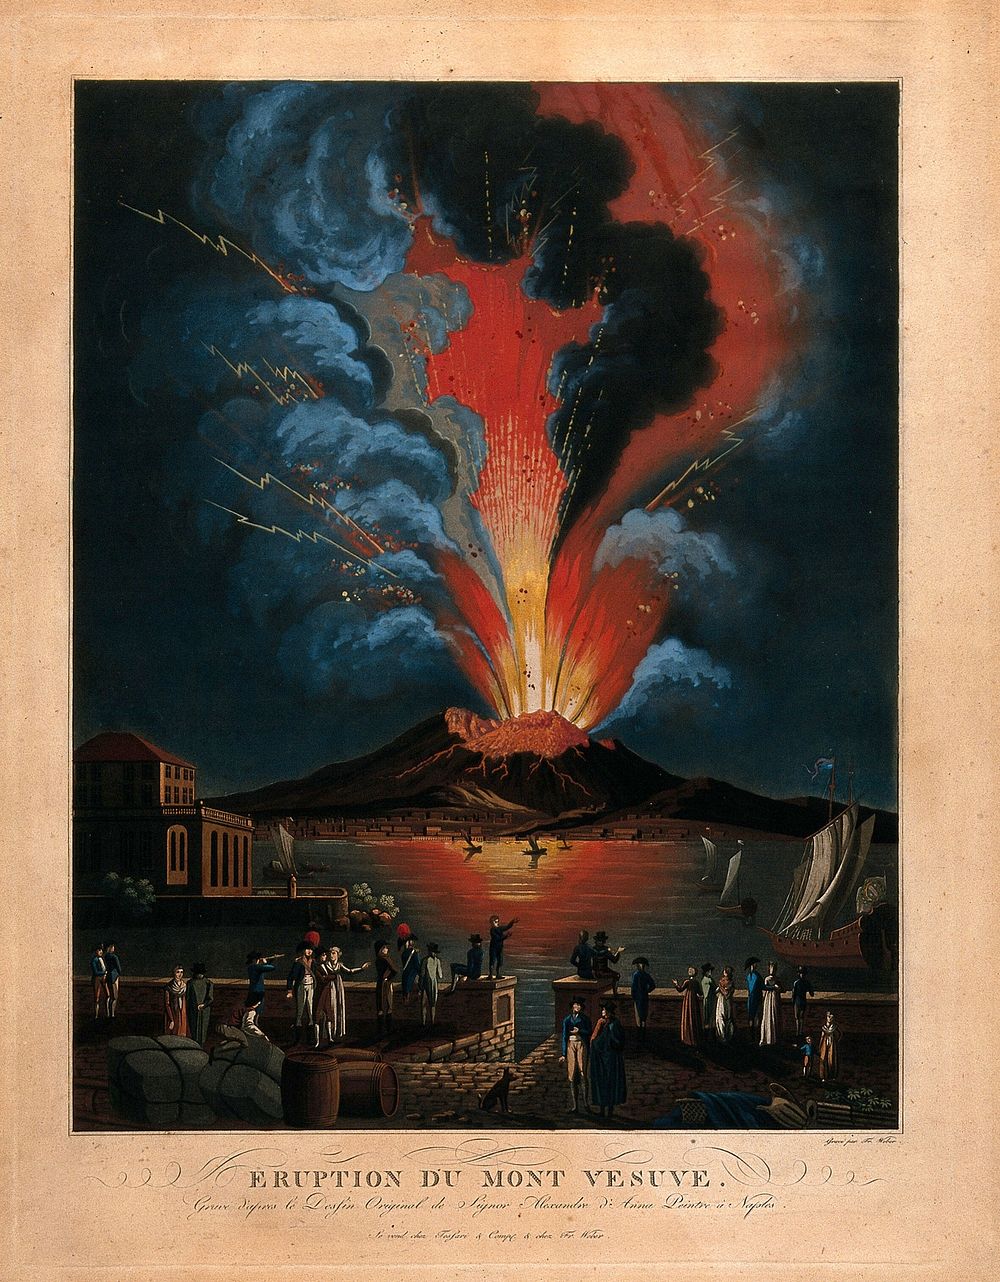 An eruption of Mount Vesuvius at night; people watching the eruption in the foreground. Coloured aquatint by Fr. Weber after…